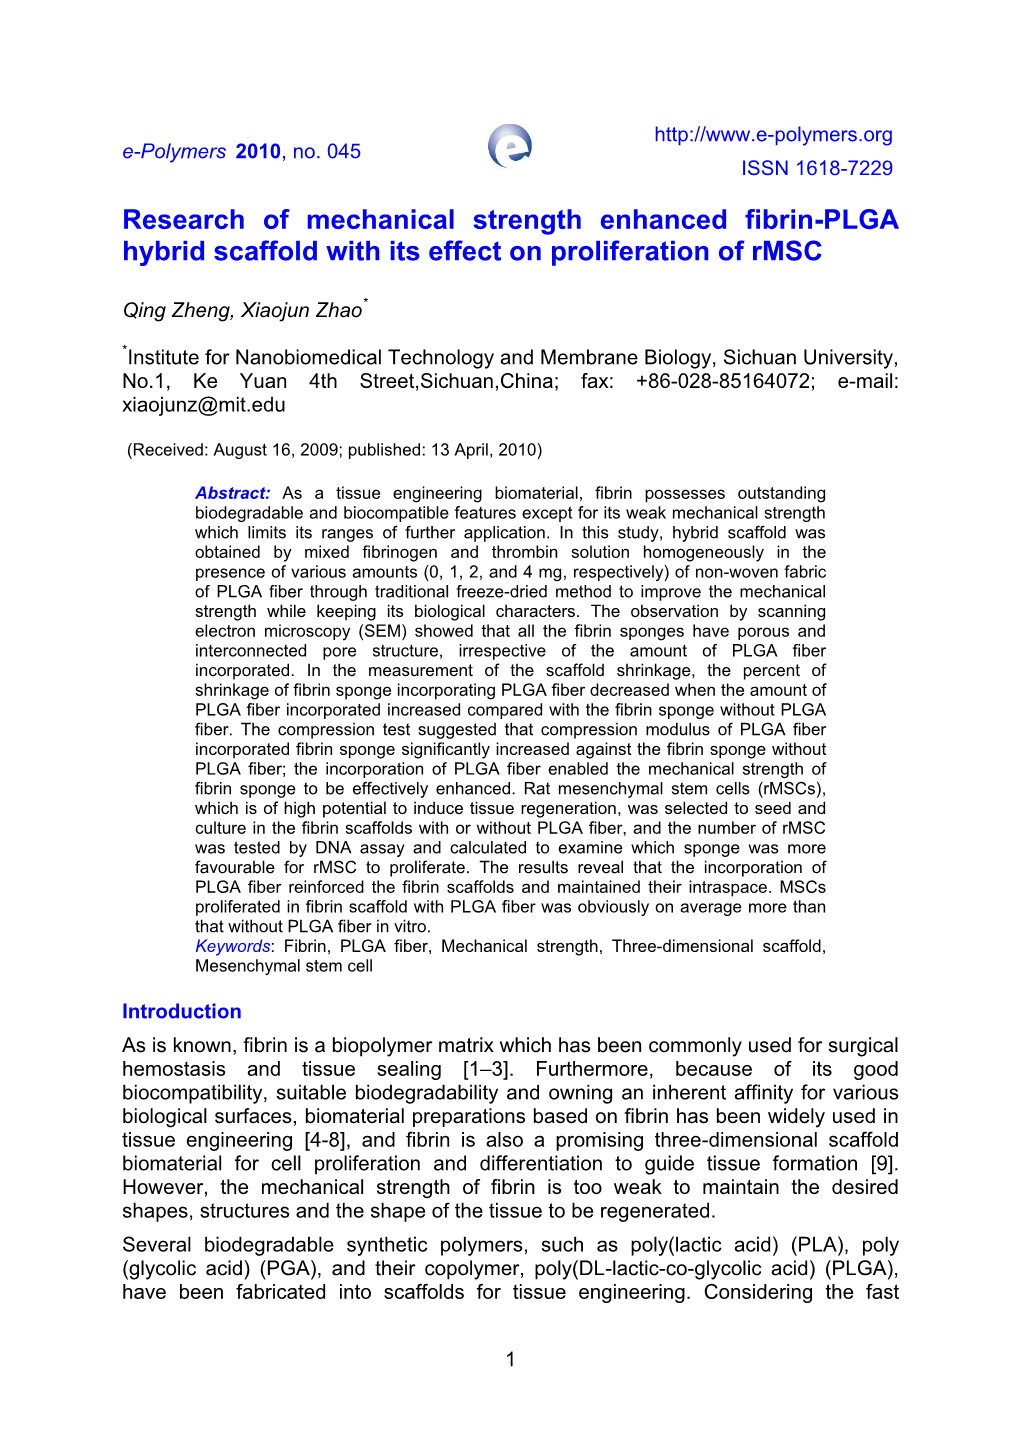 Research of Mechanical Strength Enhanced Fibrin-PLGA Hybrid Scaffold with Its Effect on Proliferation of Rmsc